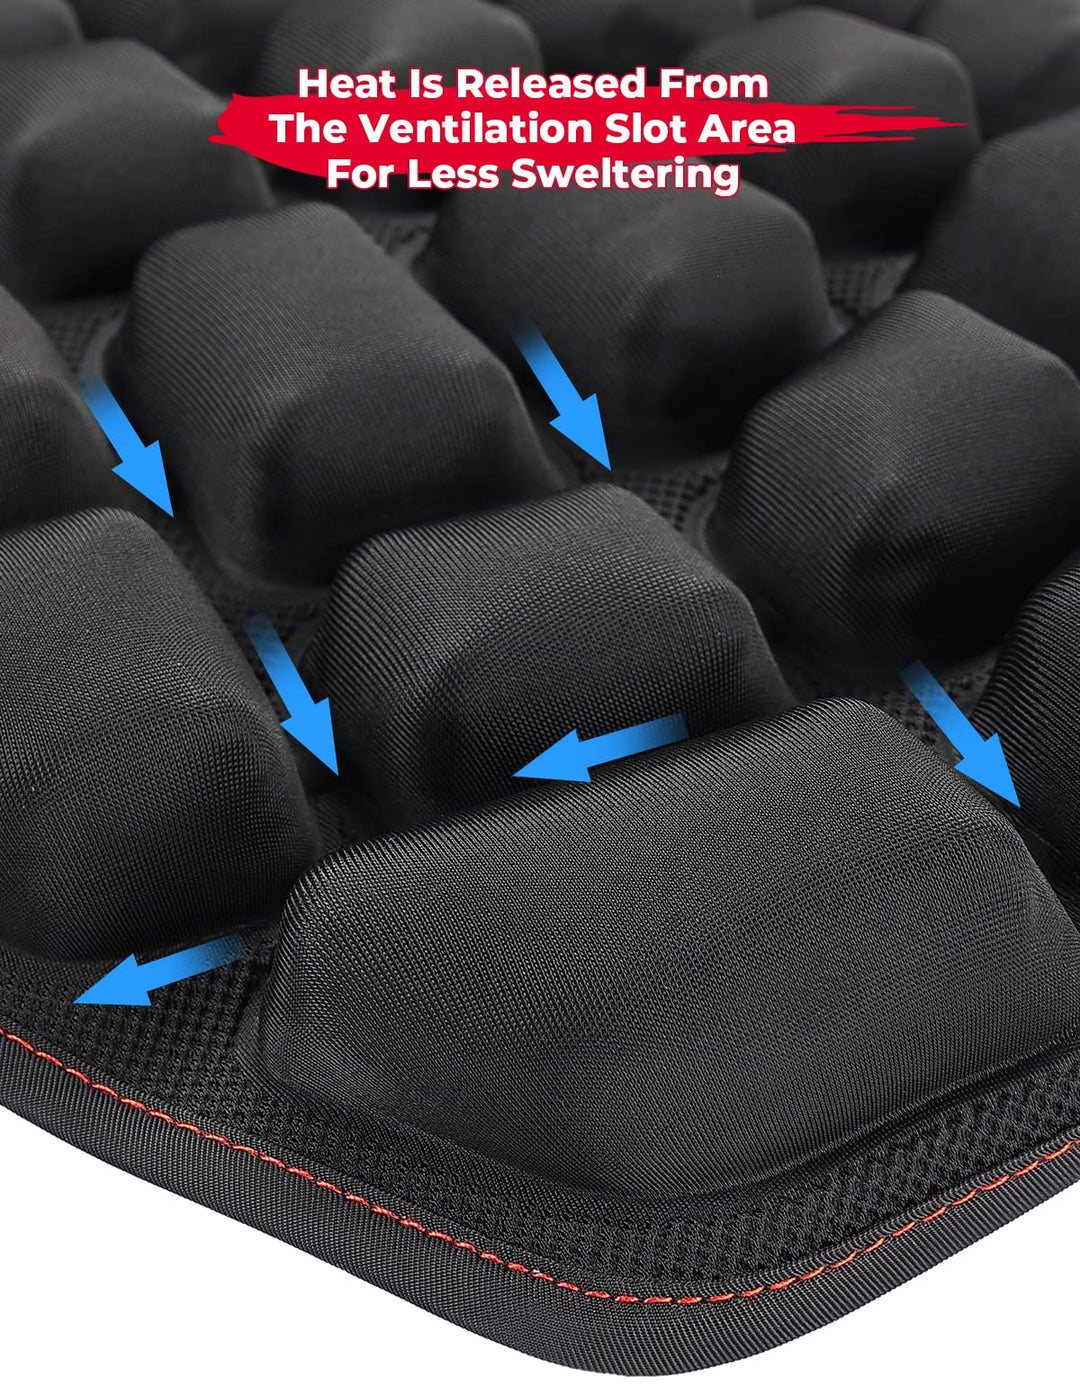 Motorcycle Foldable 3D Air Fillable Seat Cushion